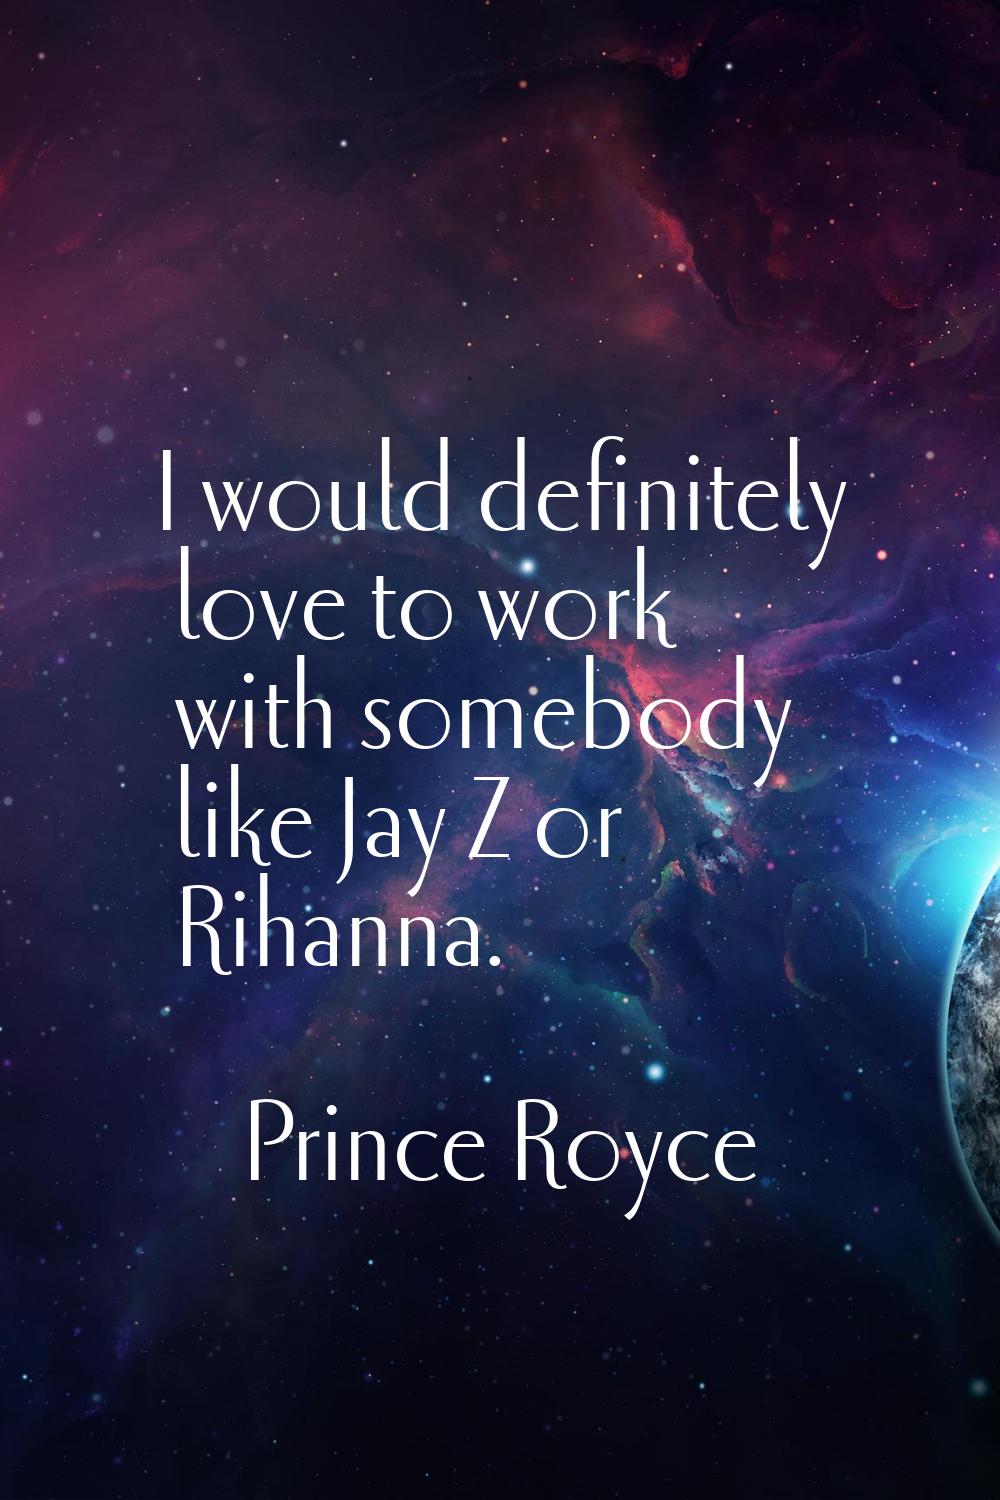 I would definitely love to work with somebody like Jay Z or Rihanna.